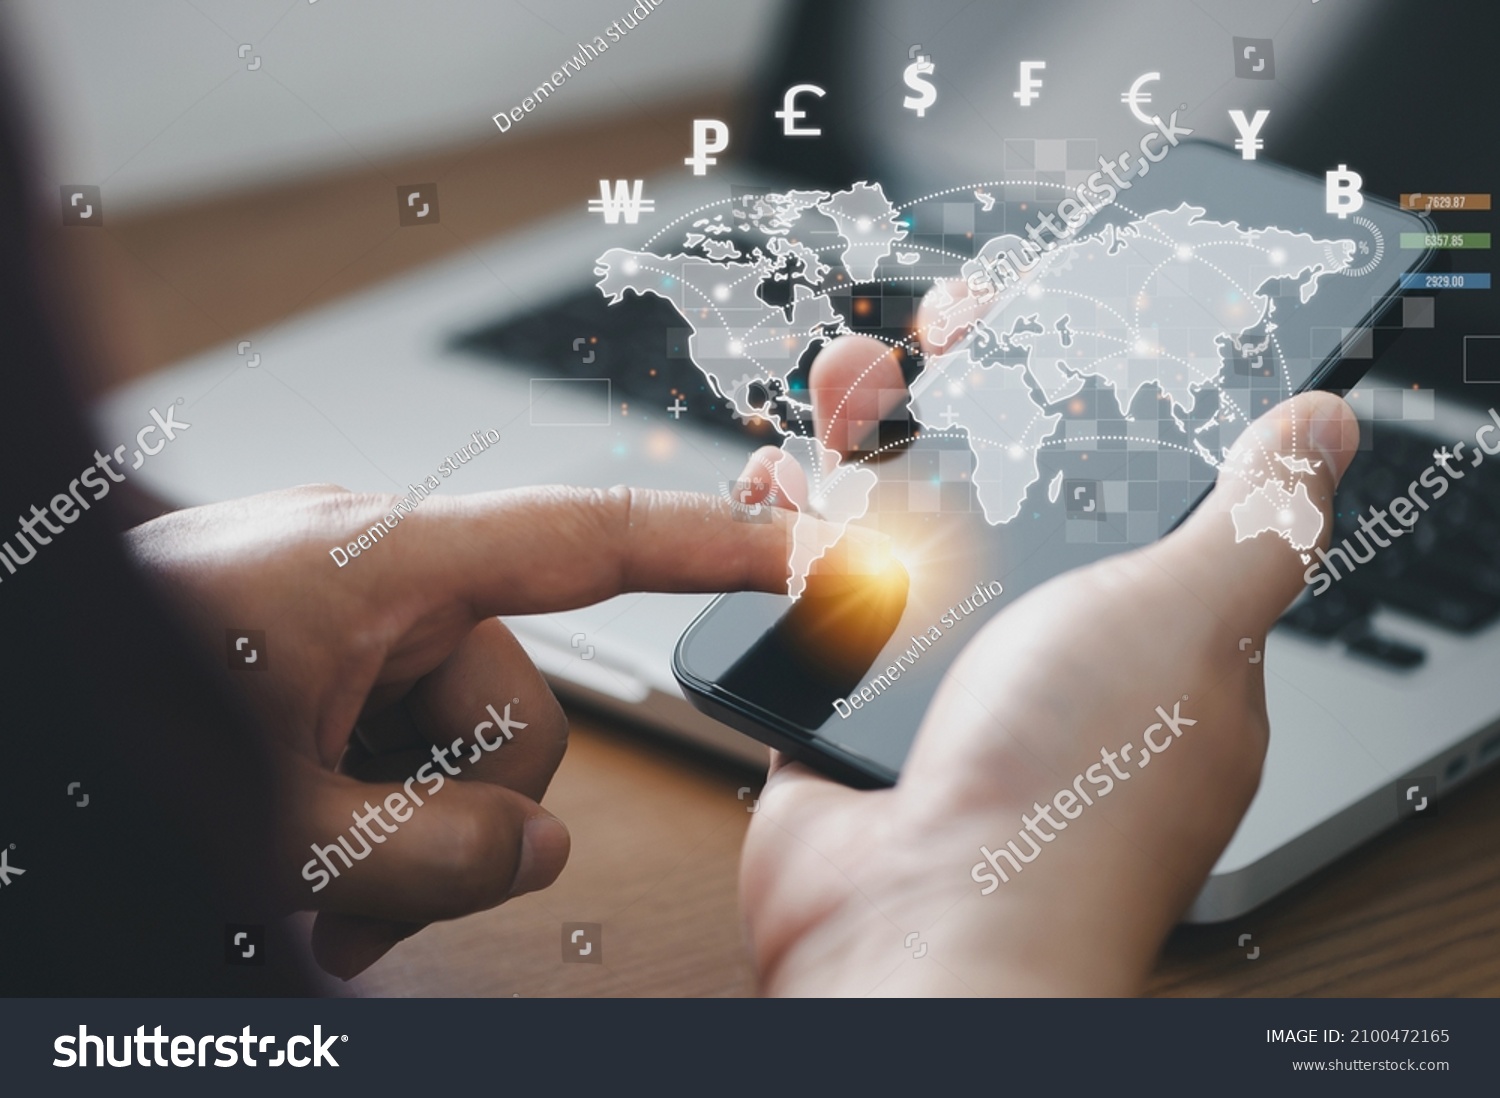 Man using mobile phone and laptop computer to money transfers and currency exchanges between countries of the world. online banking interbank payment concept. #2100472165